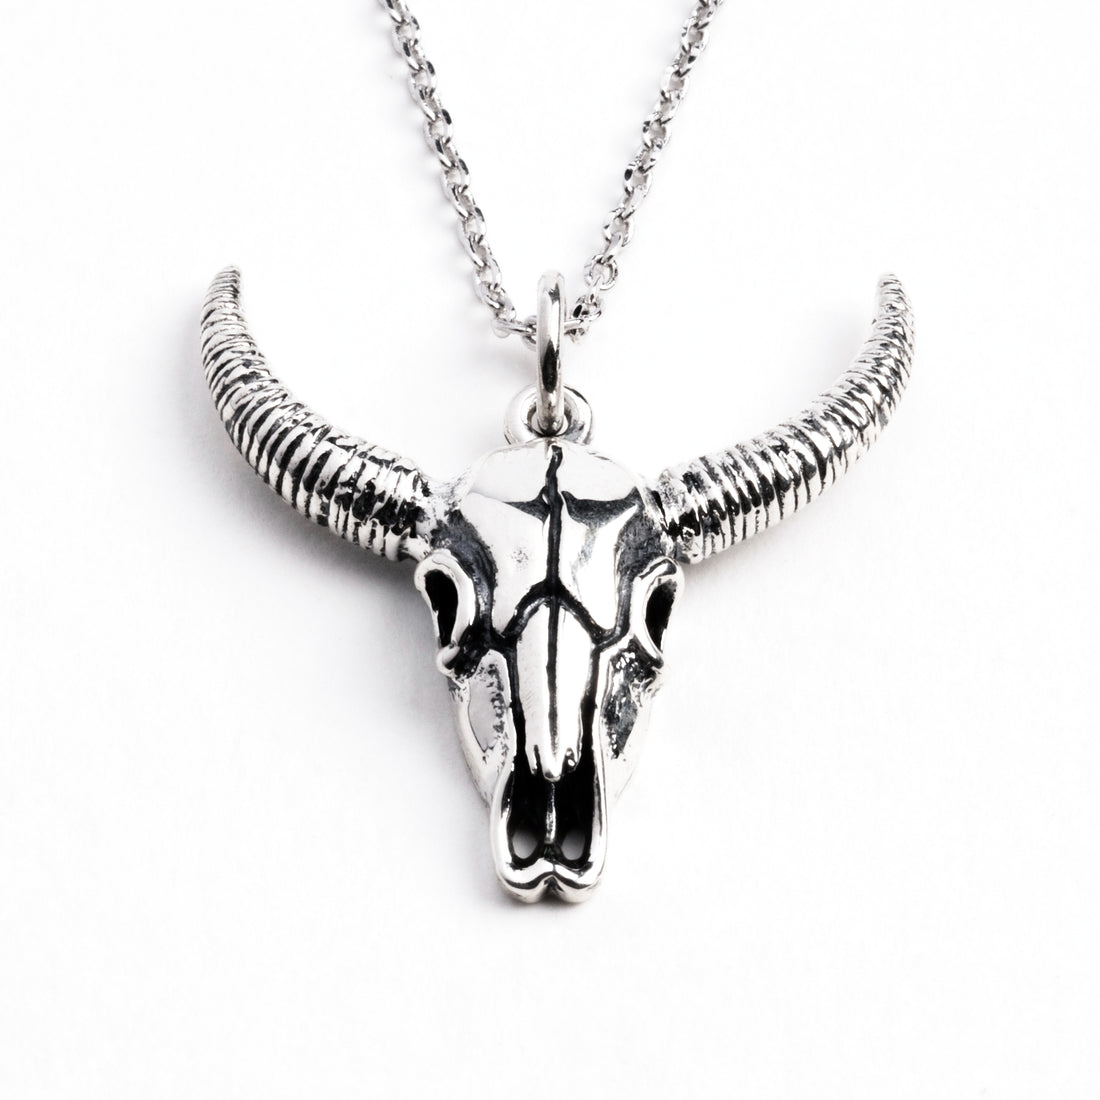 Bull skull silver charm necklace frontal view